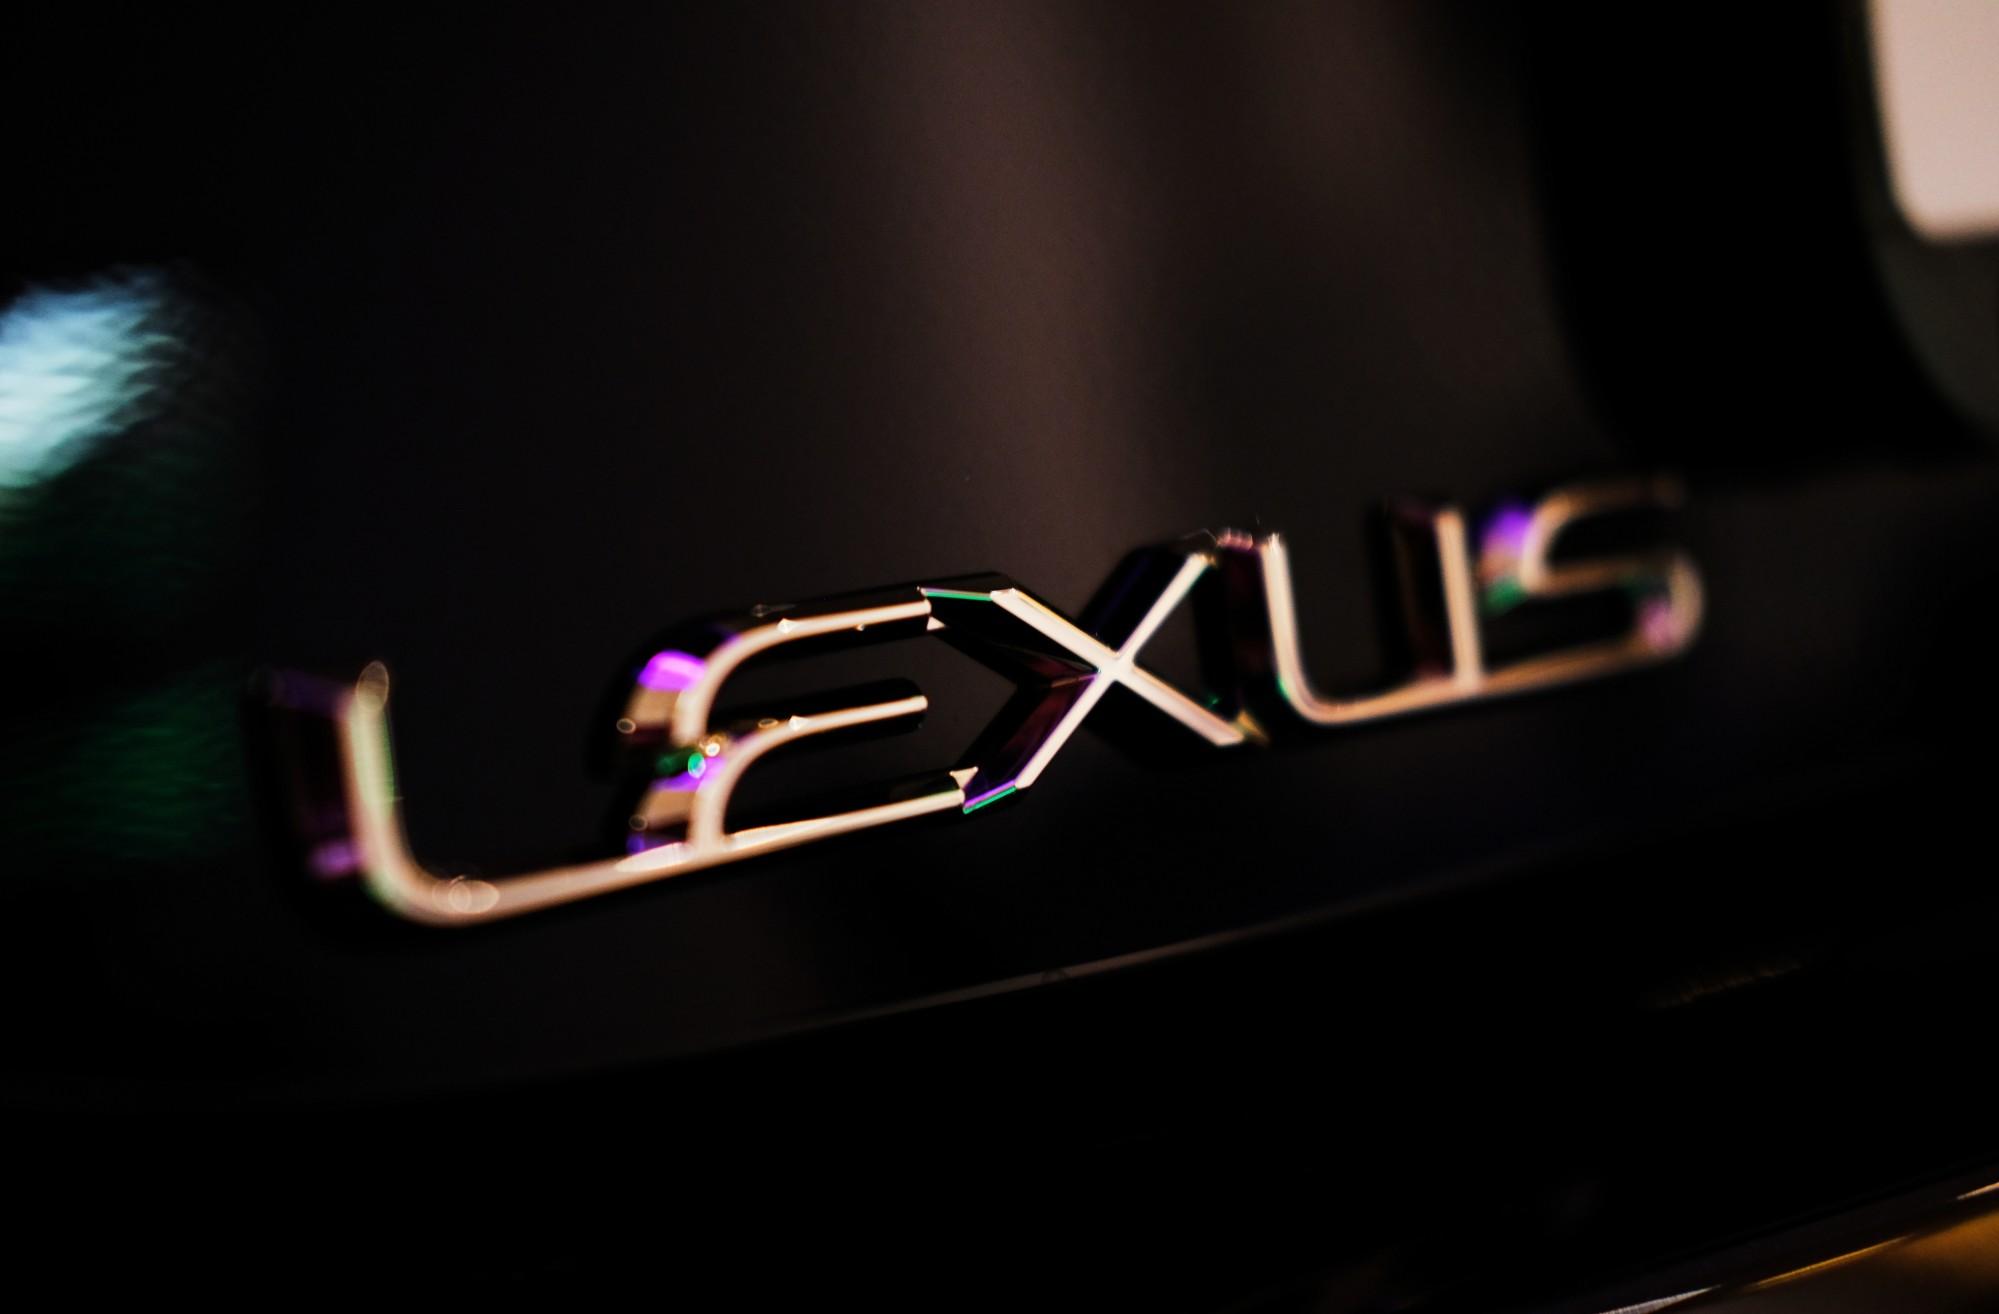 The Lexus logo on the side of a car.